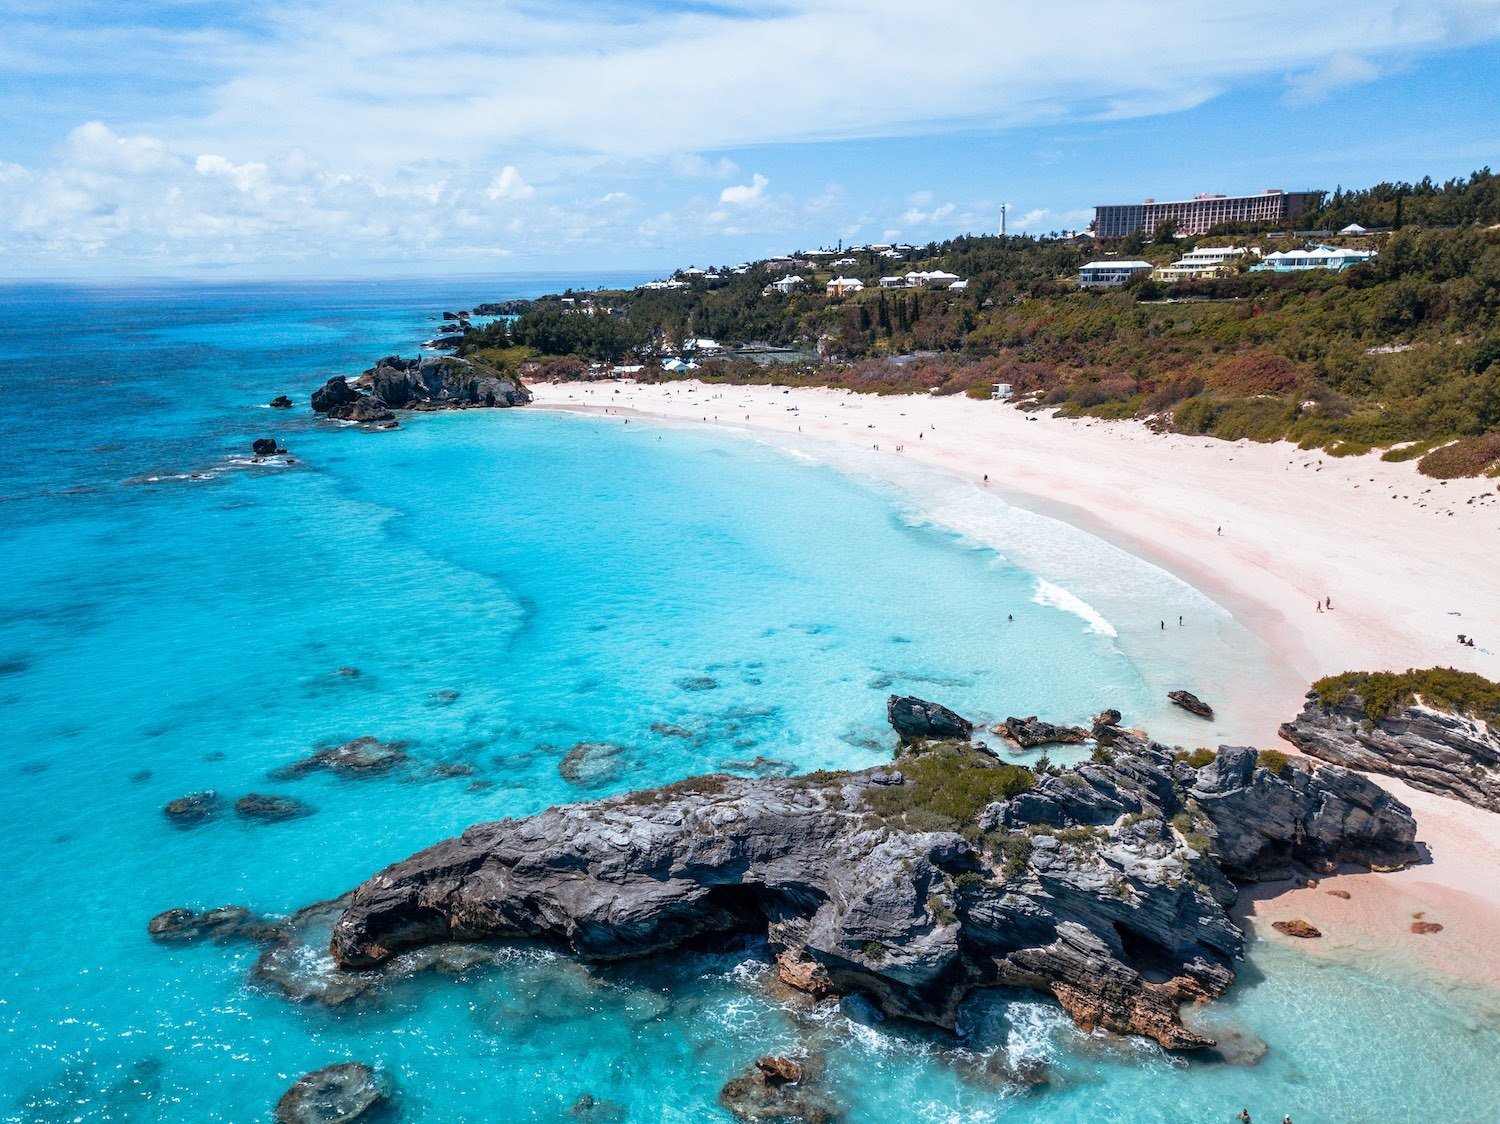 Bermuda Travel Guide - Where is hot in January